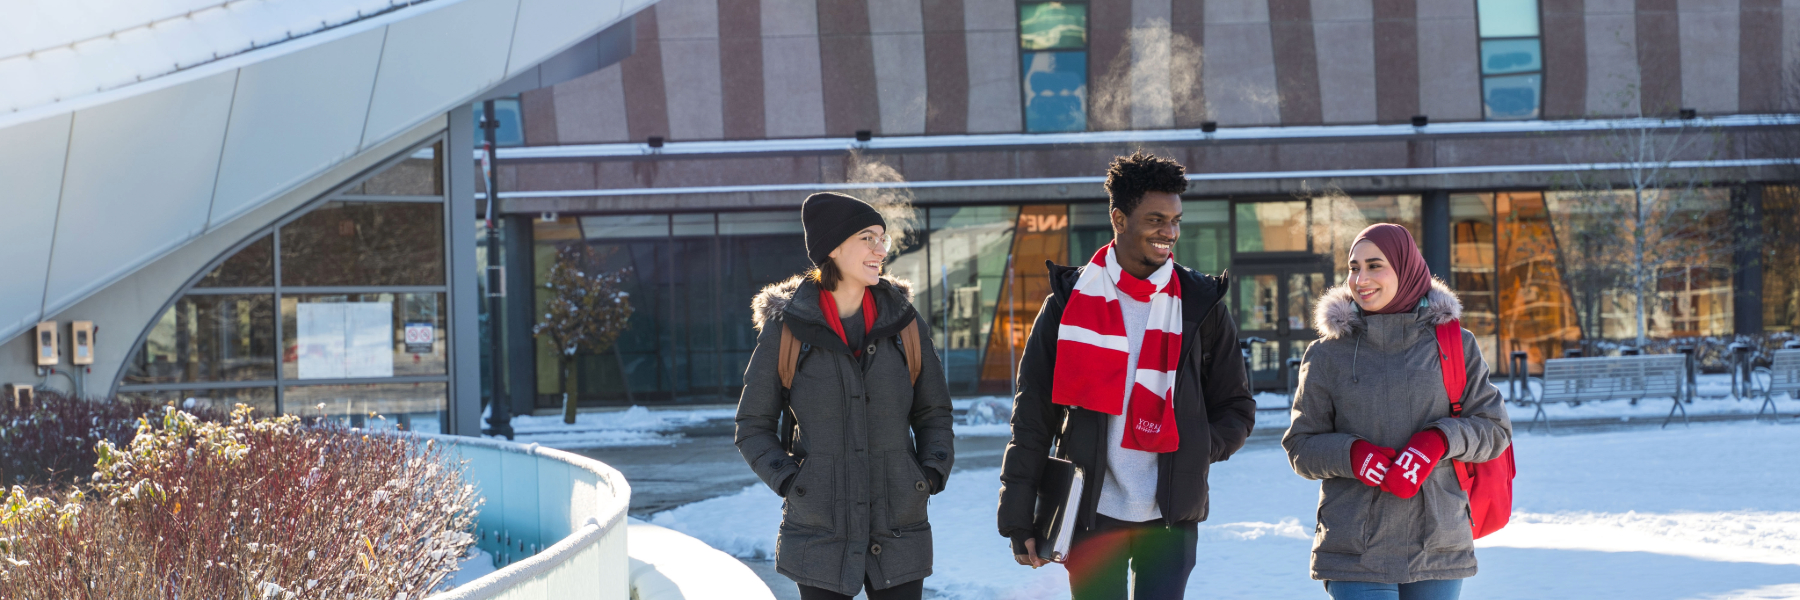 Students walking on Keele Campus in winter